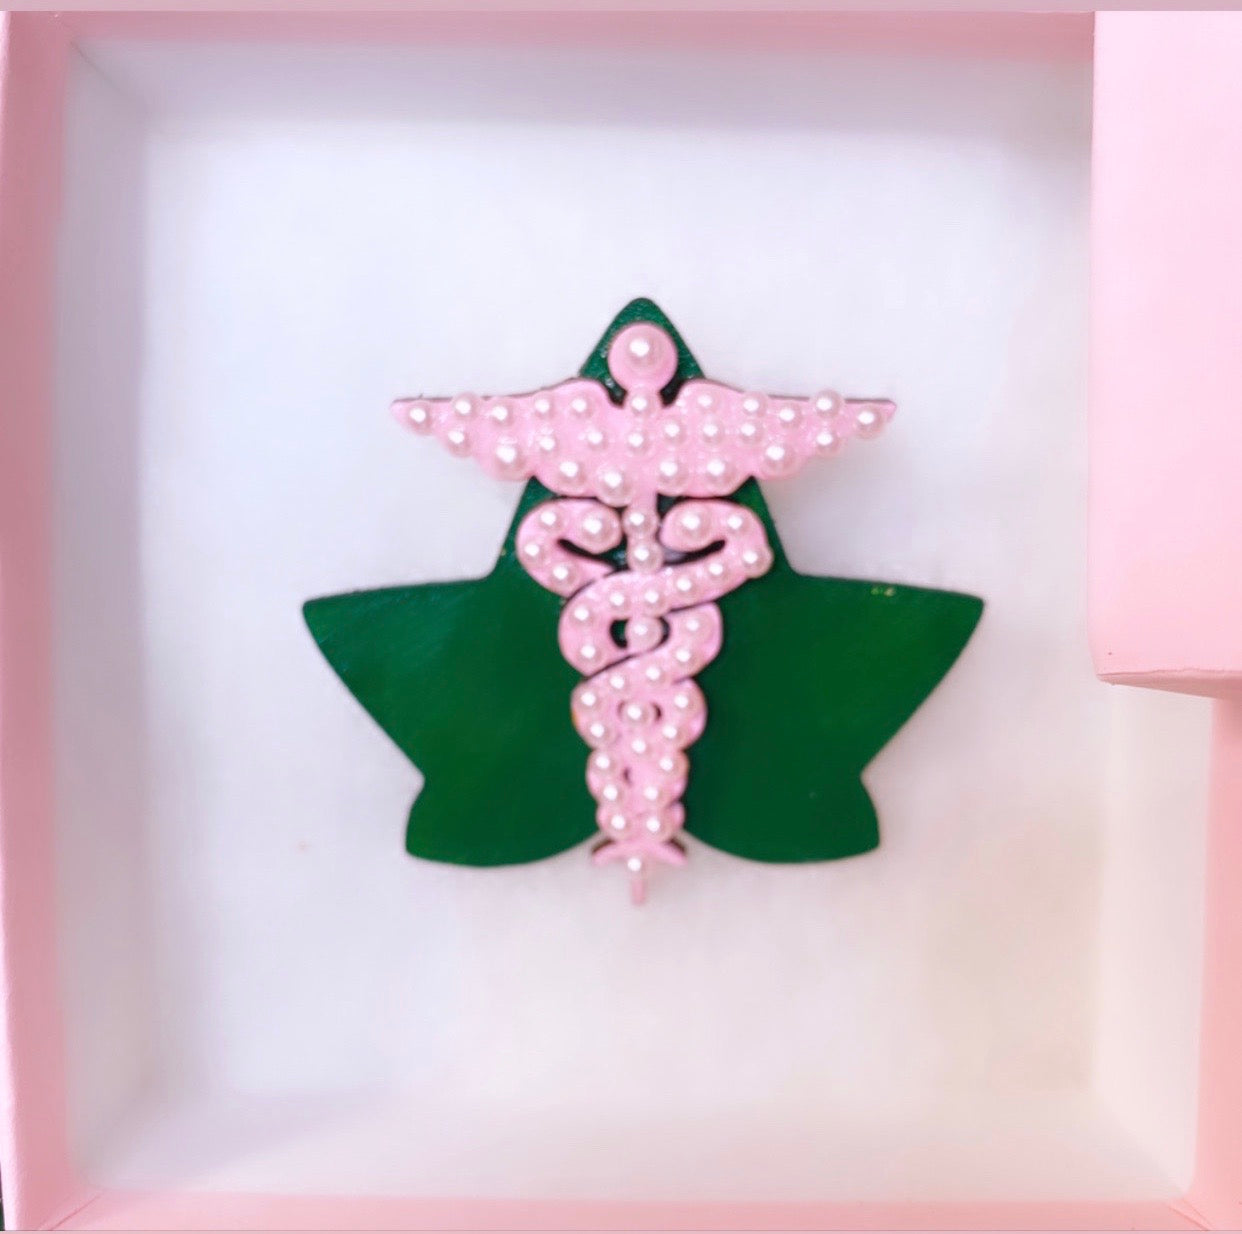 Pink, pearl, and green ivy AKA Caduceus medical brooch for  healthcare professionals.